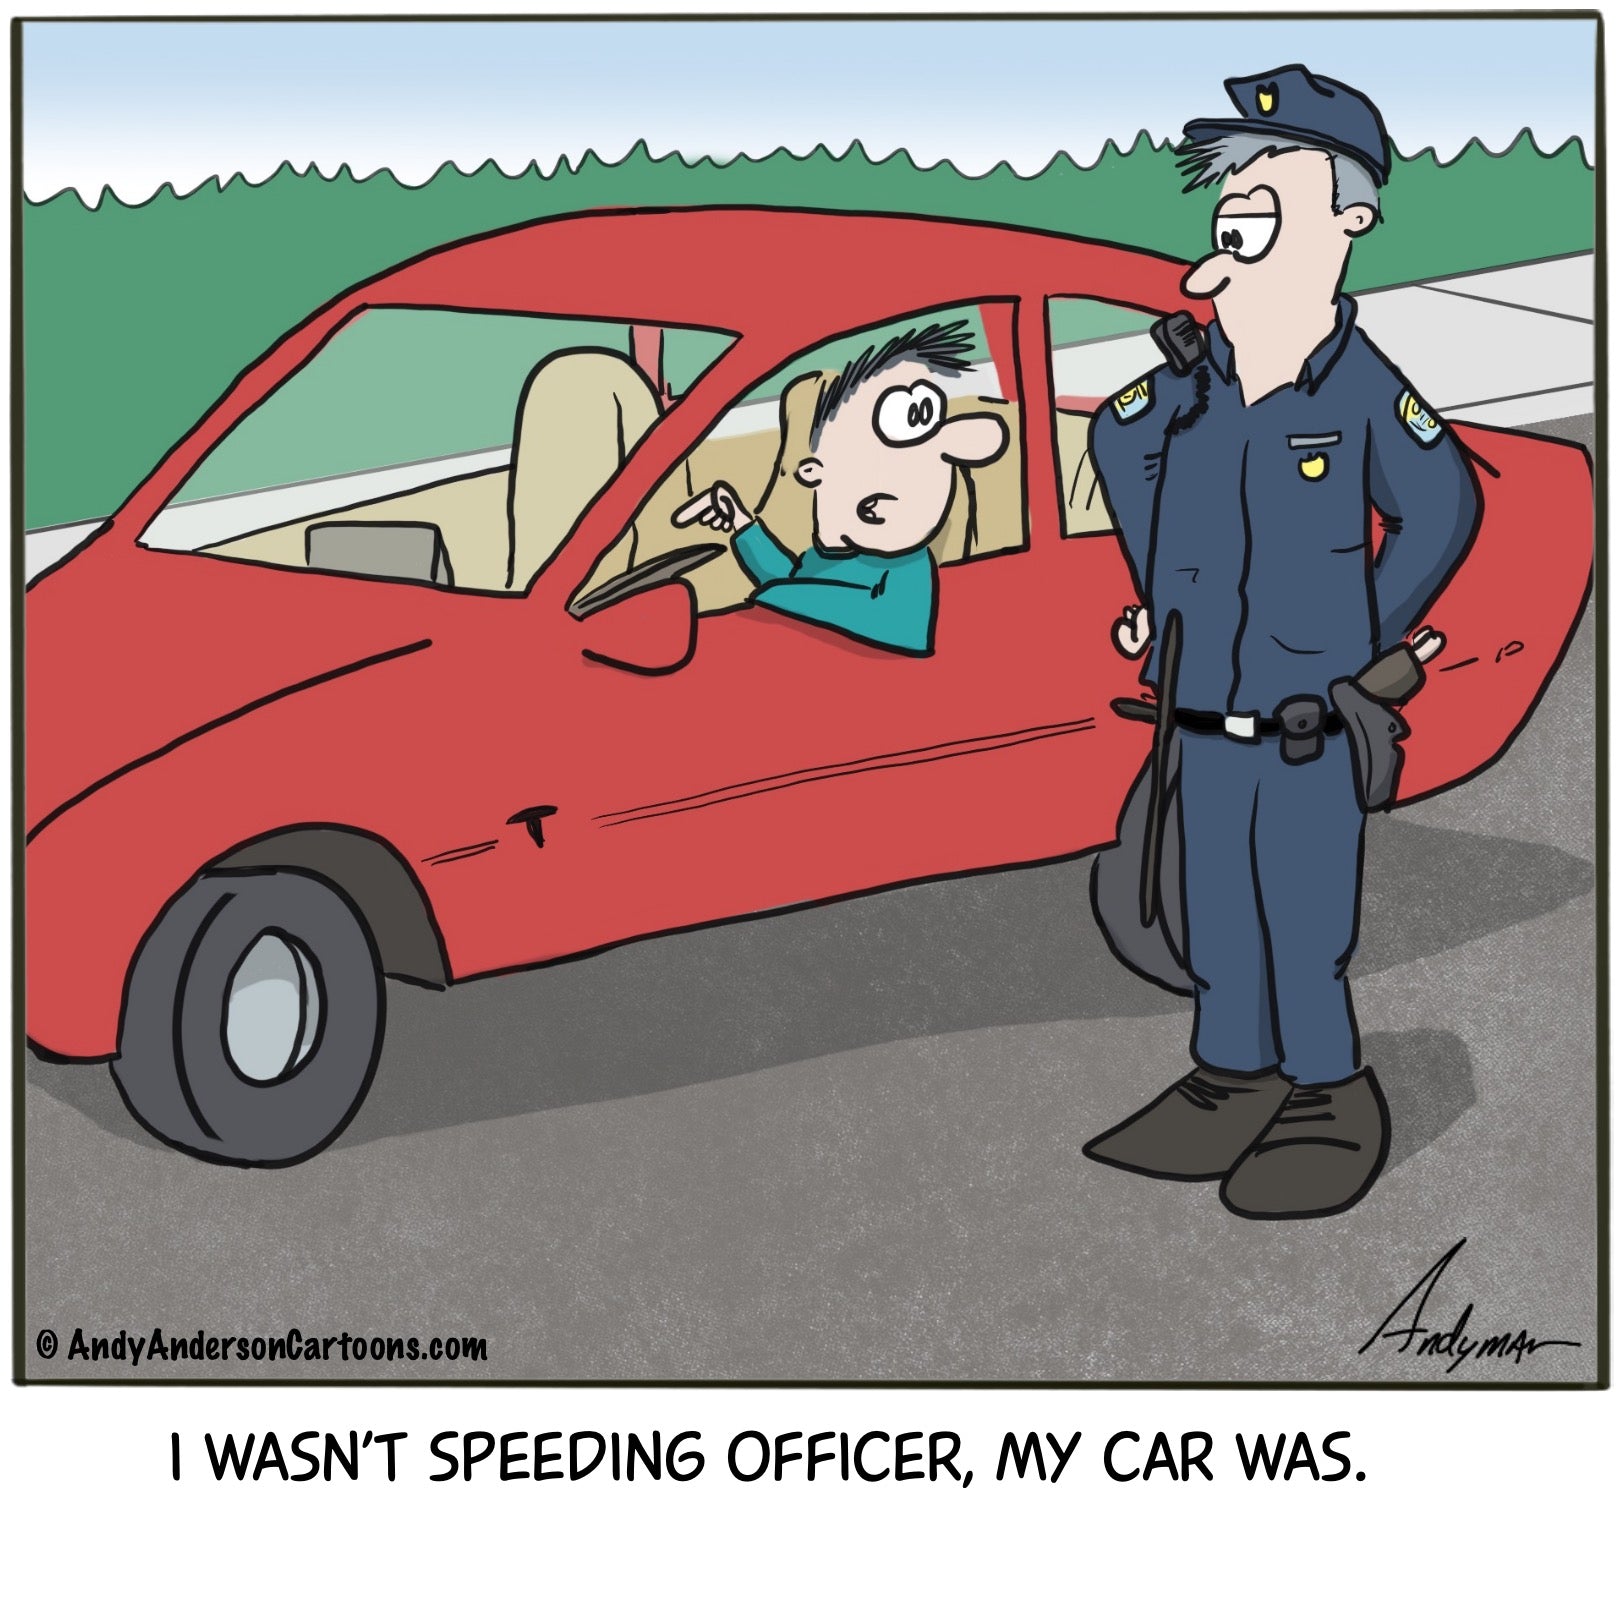 Cartoon about self driving car being pulled over for speeding